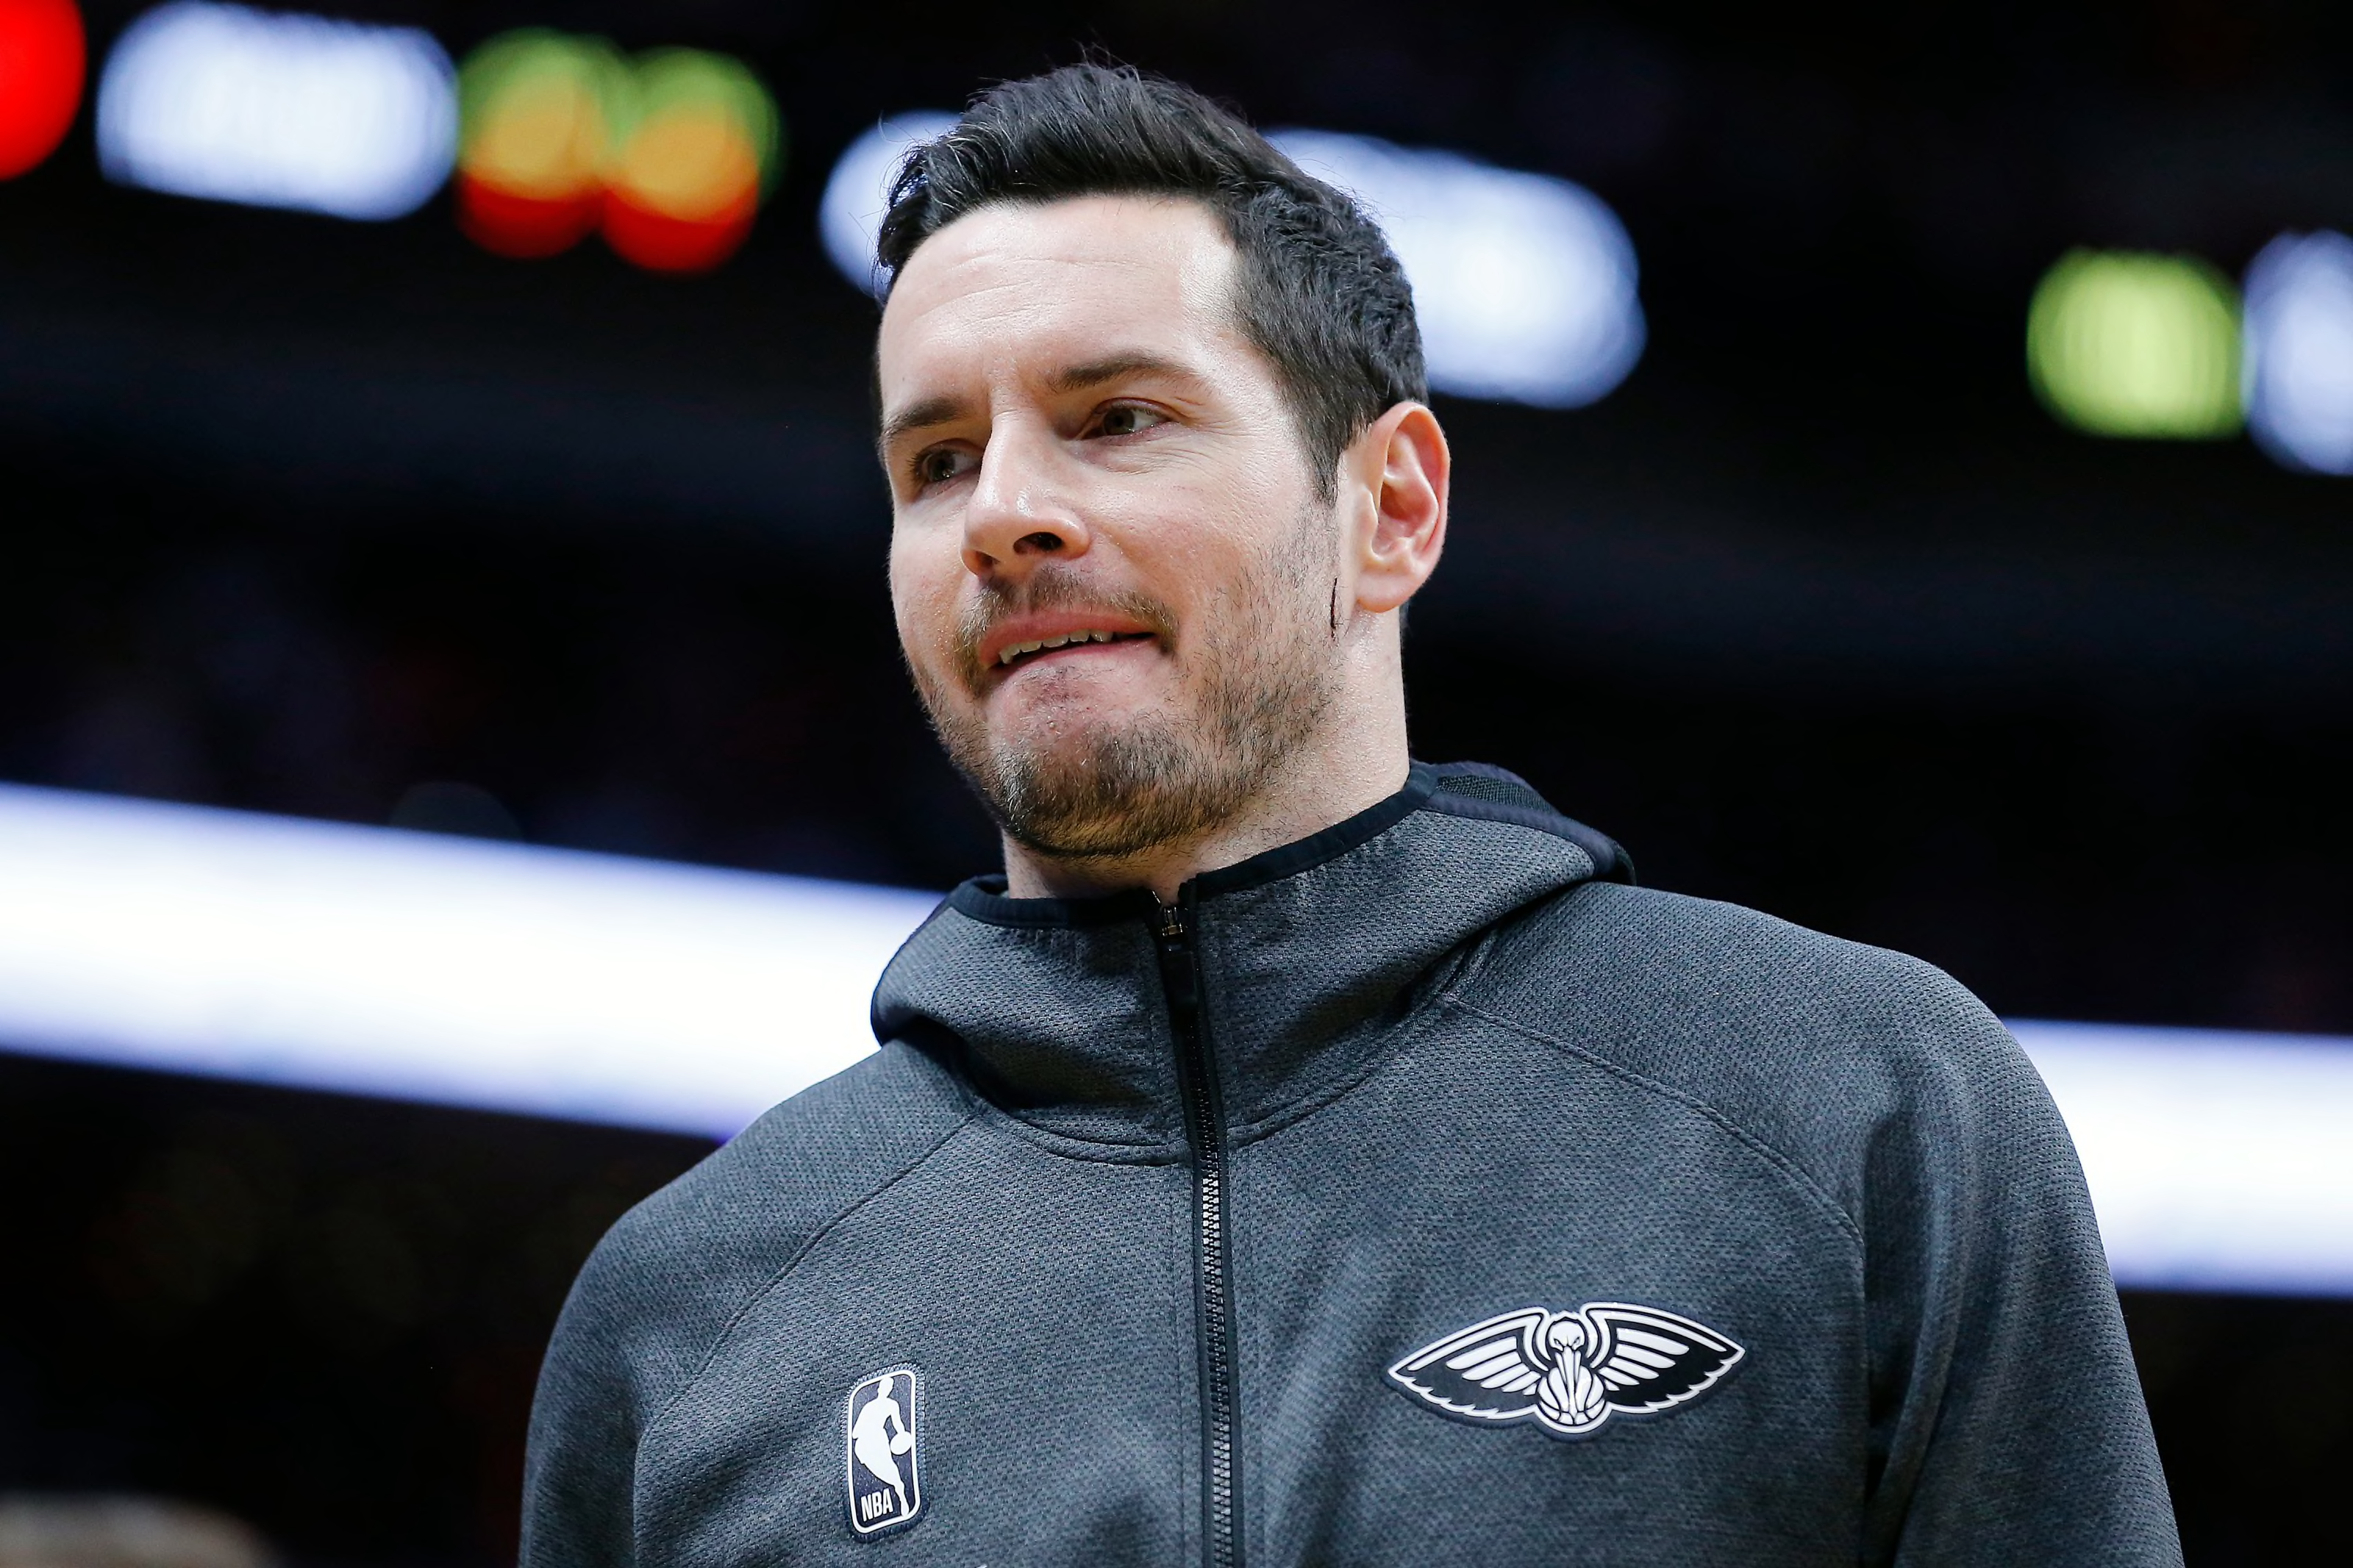 Miami Heat Rumors: JJ Redick thinks Pelicans reported Heat for